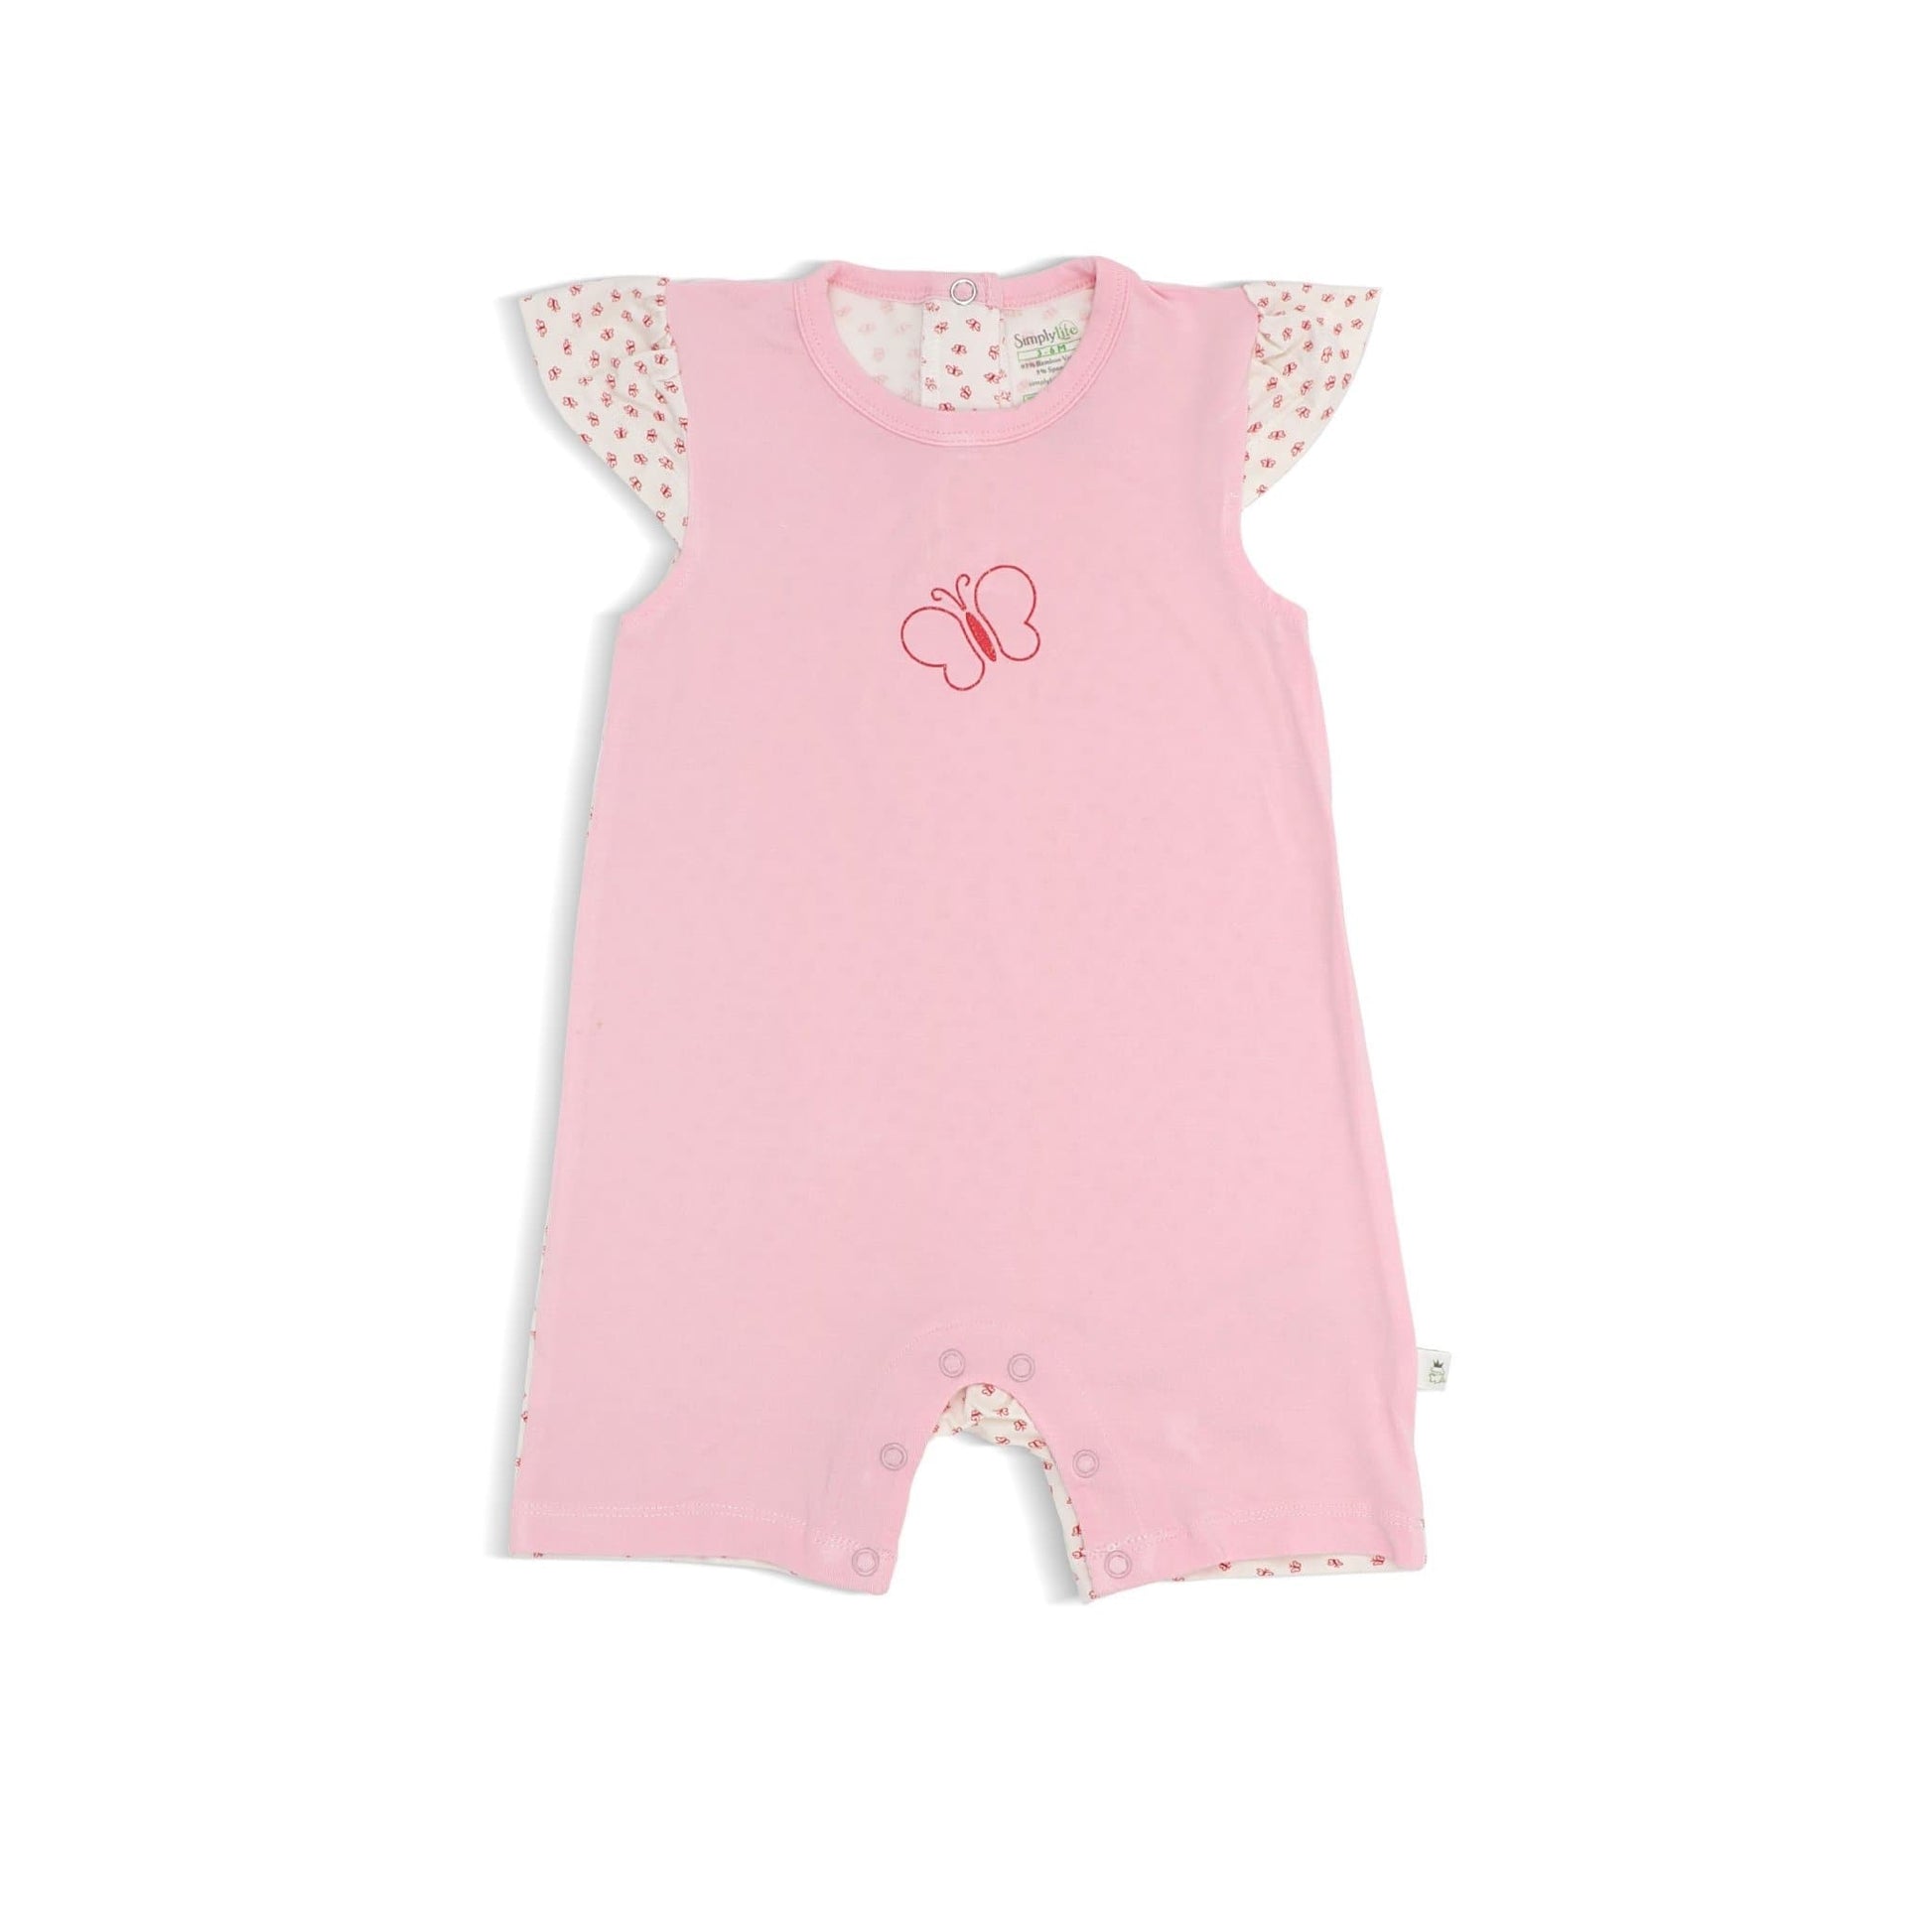 Lovely Butterflies - Shortall (Cap Sleeves) by simplylifebaby